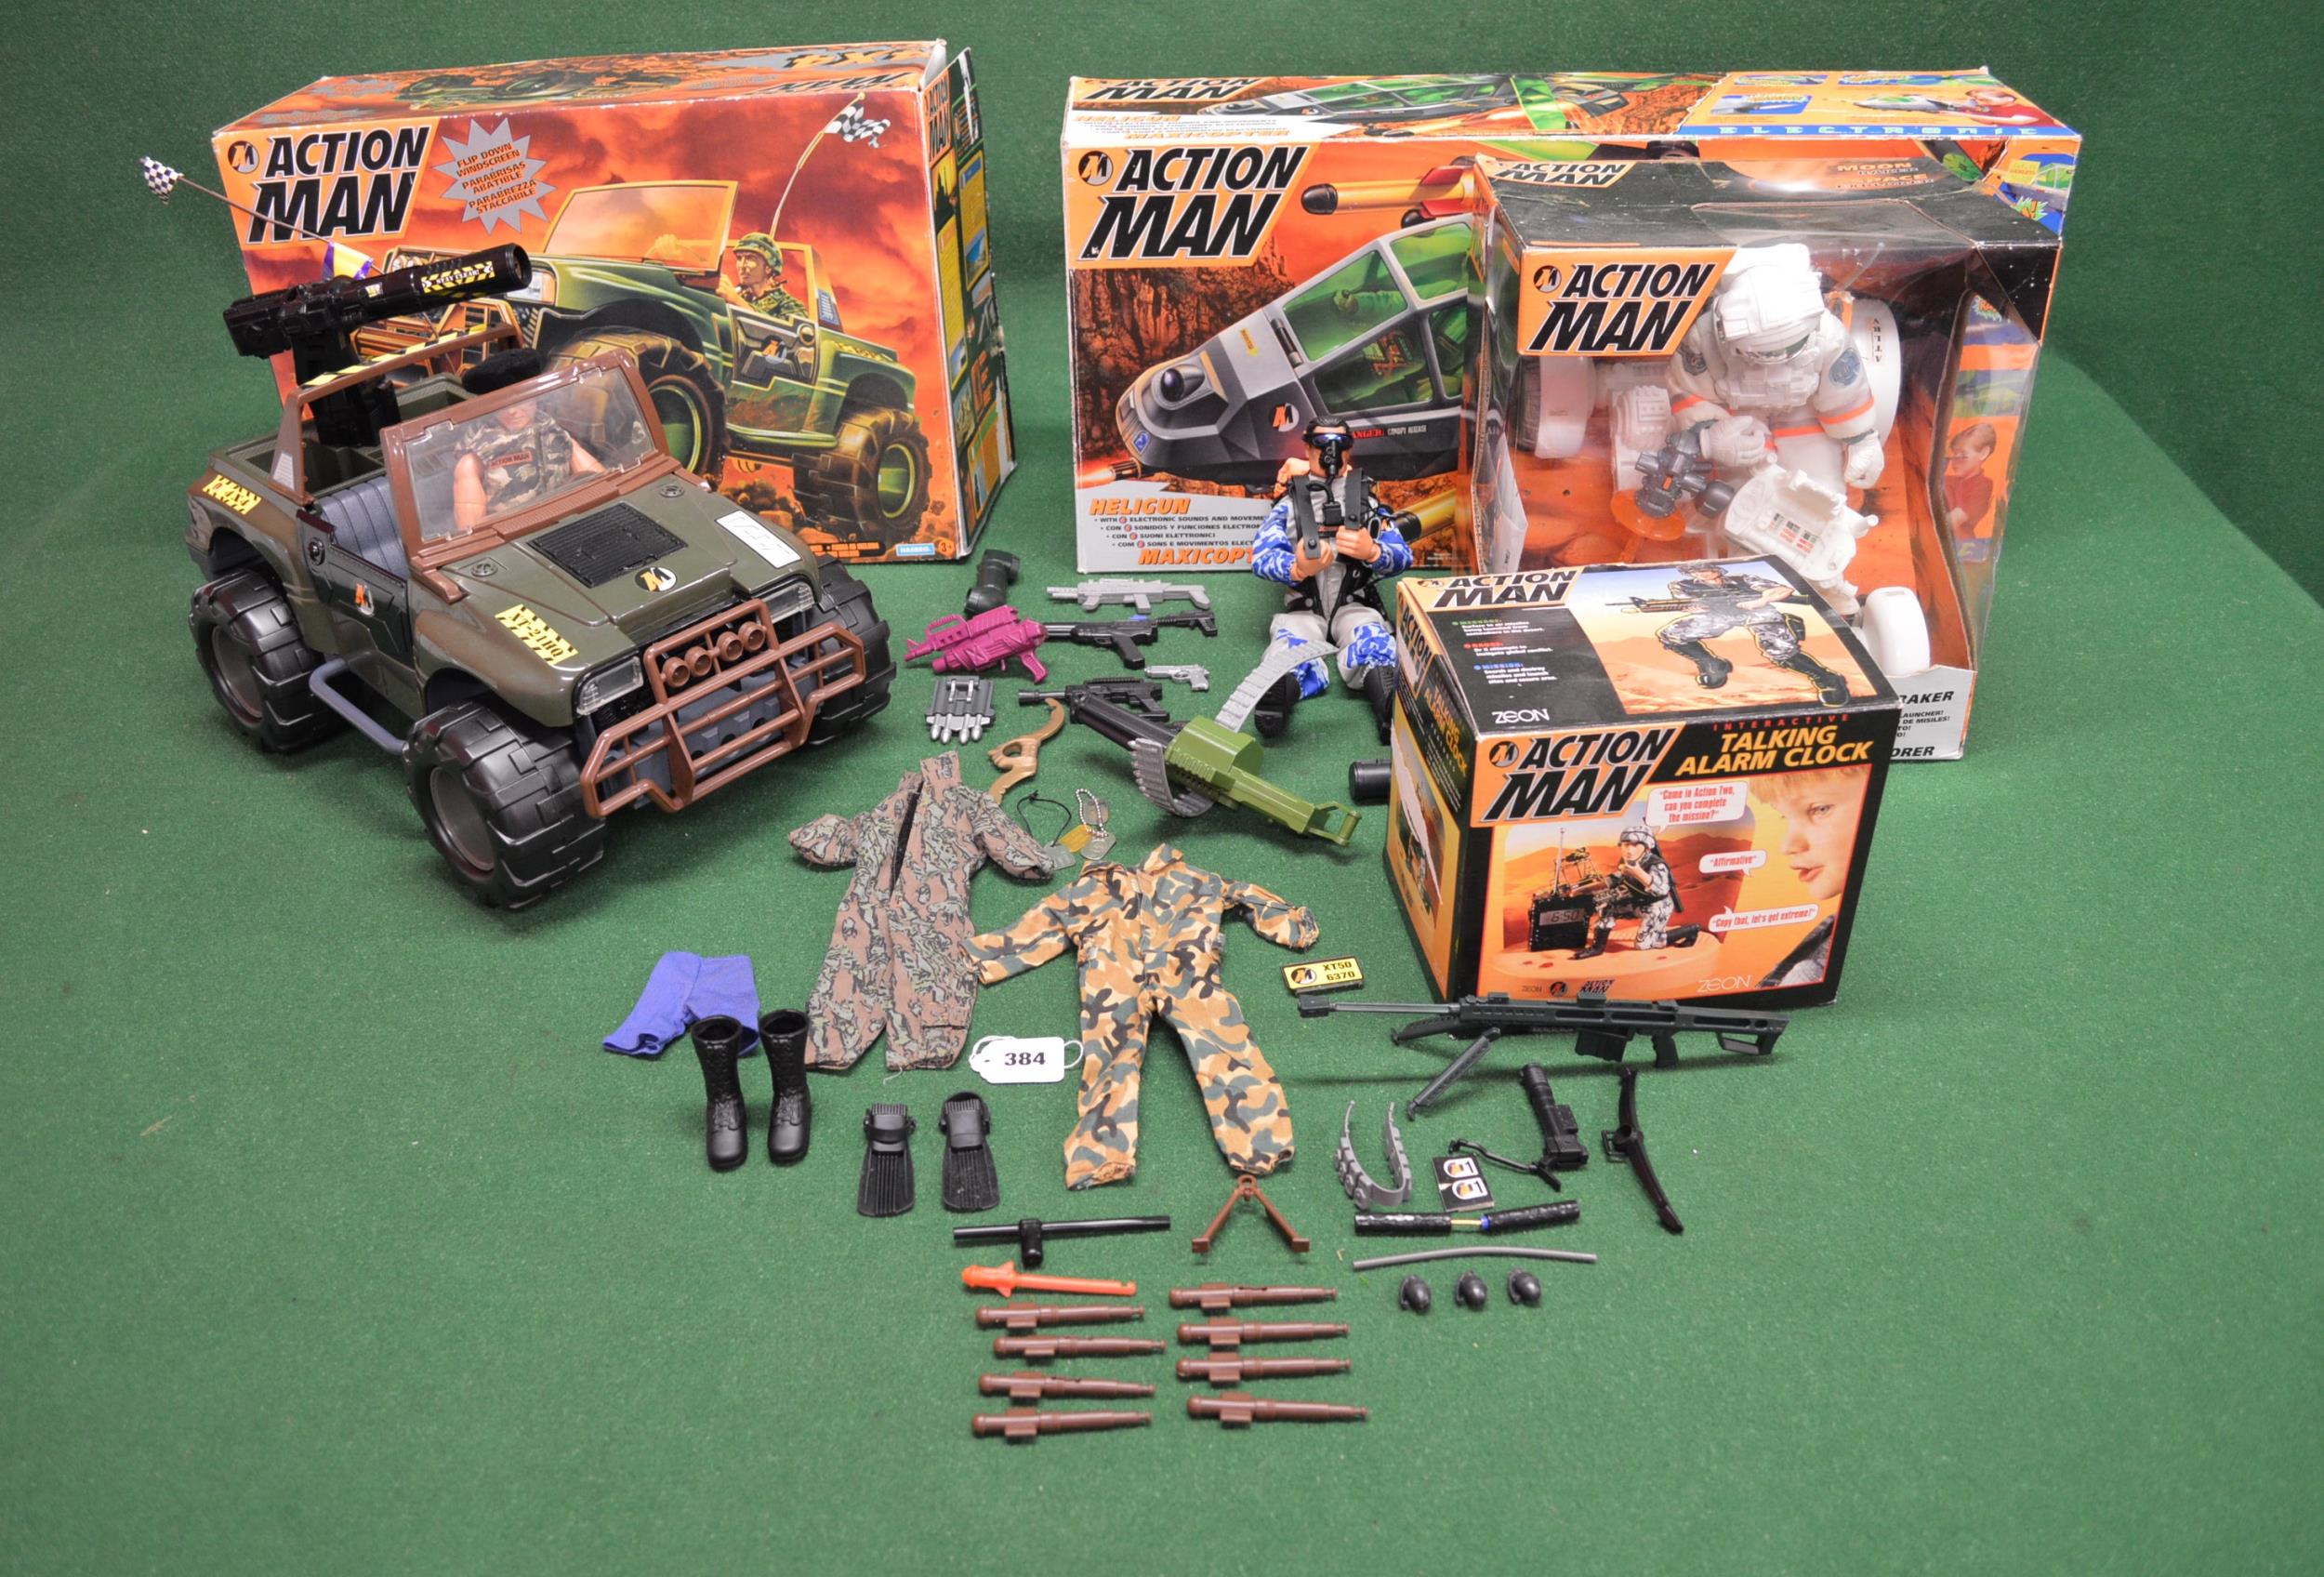 Quantity of 1990's boxed Action Man items to include: Heligun, Maxicopter, 4x4, Moonraker Space